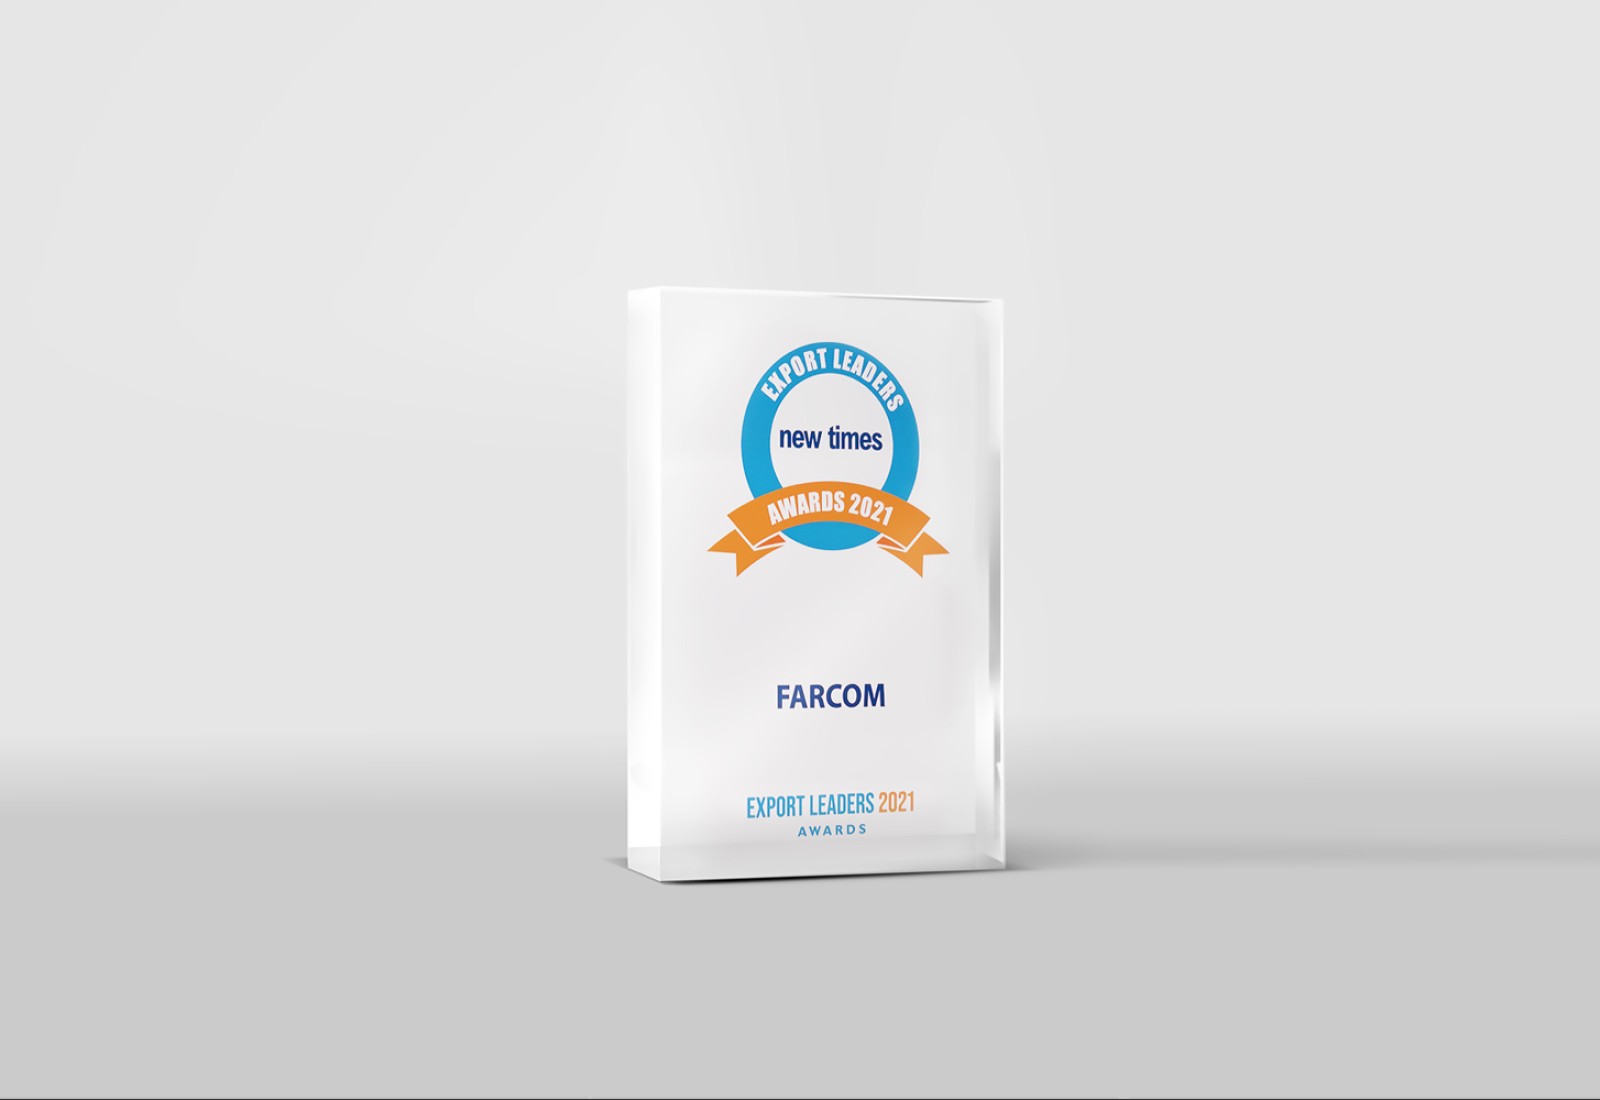 Farcom Receives honorary distinction at Export Leaders Awards 2021